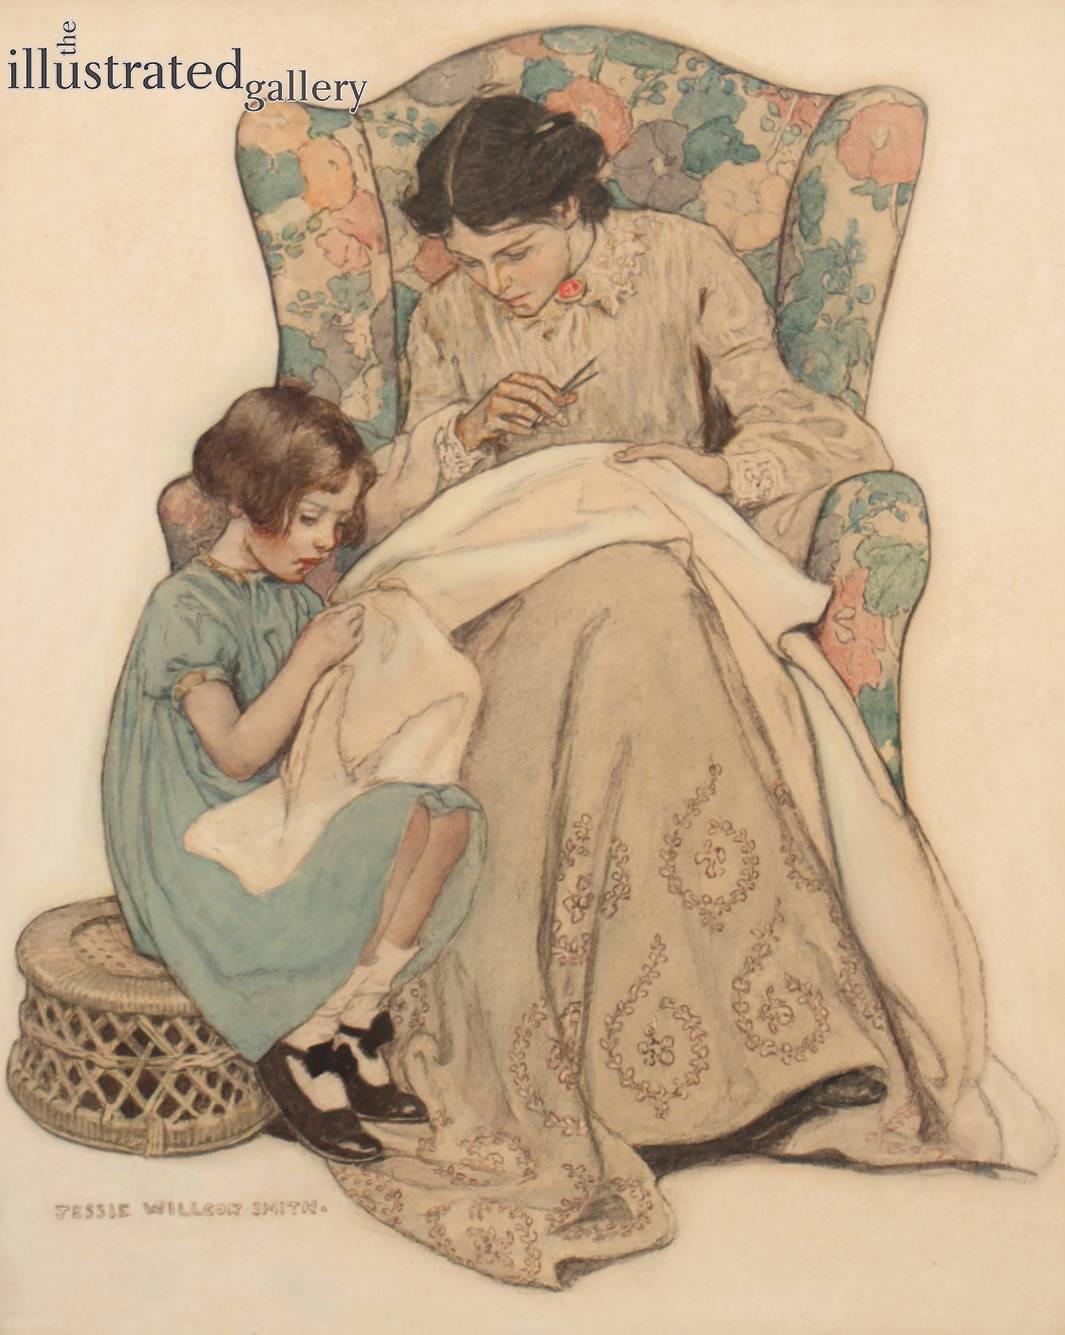 Jessie Willcox Smith Figurative Painting - The Sewing Lesson, Collier's Magazine Cover